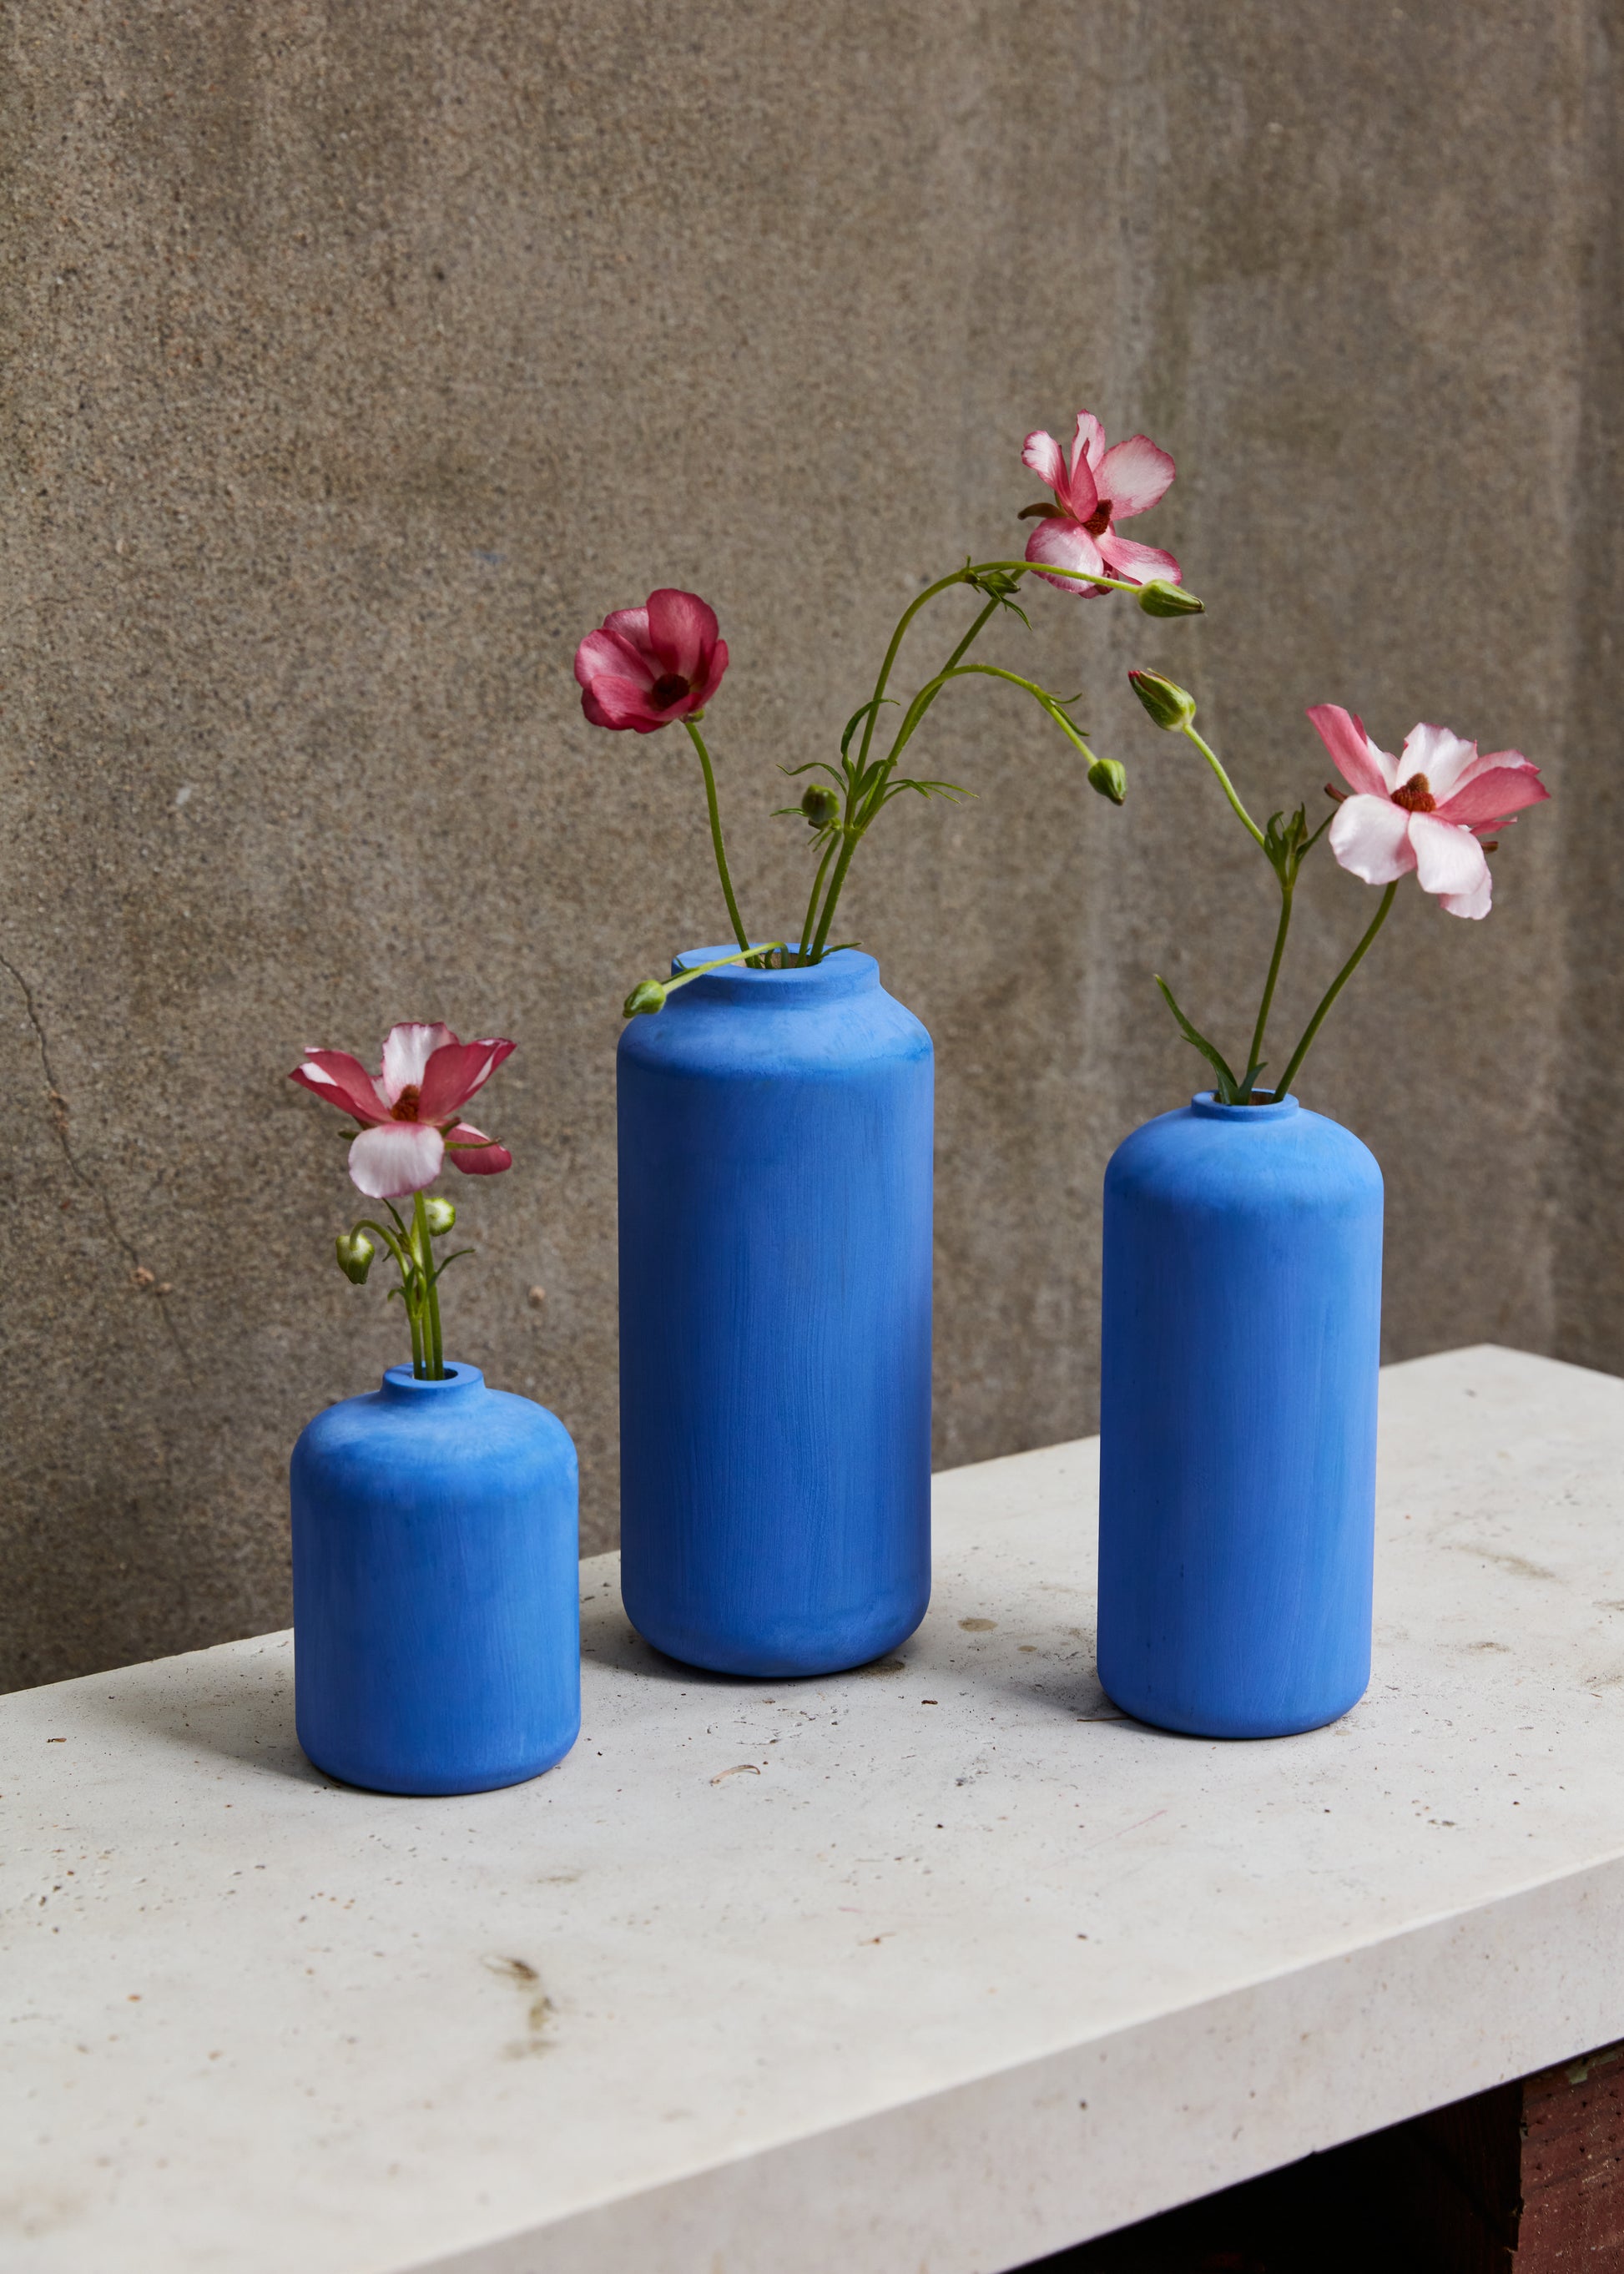 All three cobalt blue bud vases on a marble slab with a grey background. Purple flowers in the vases. By Melanie Abrantes Designs